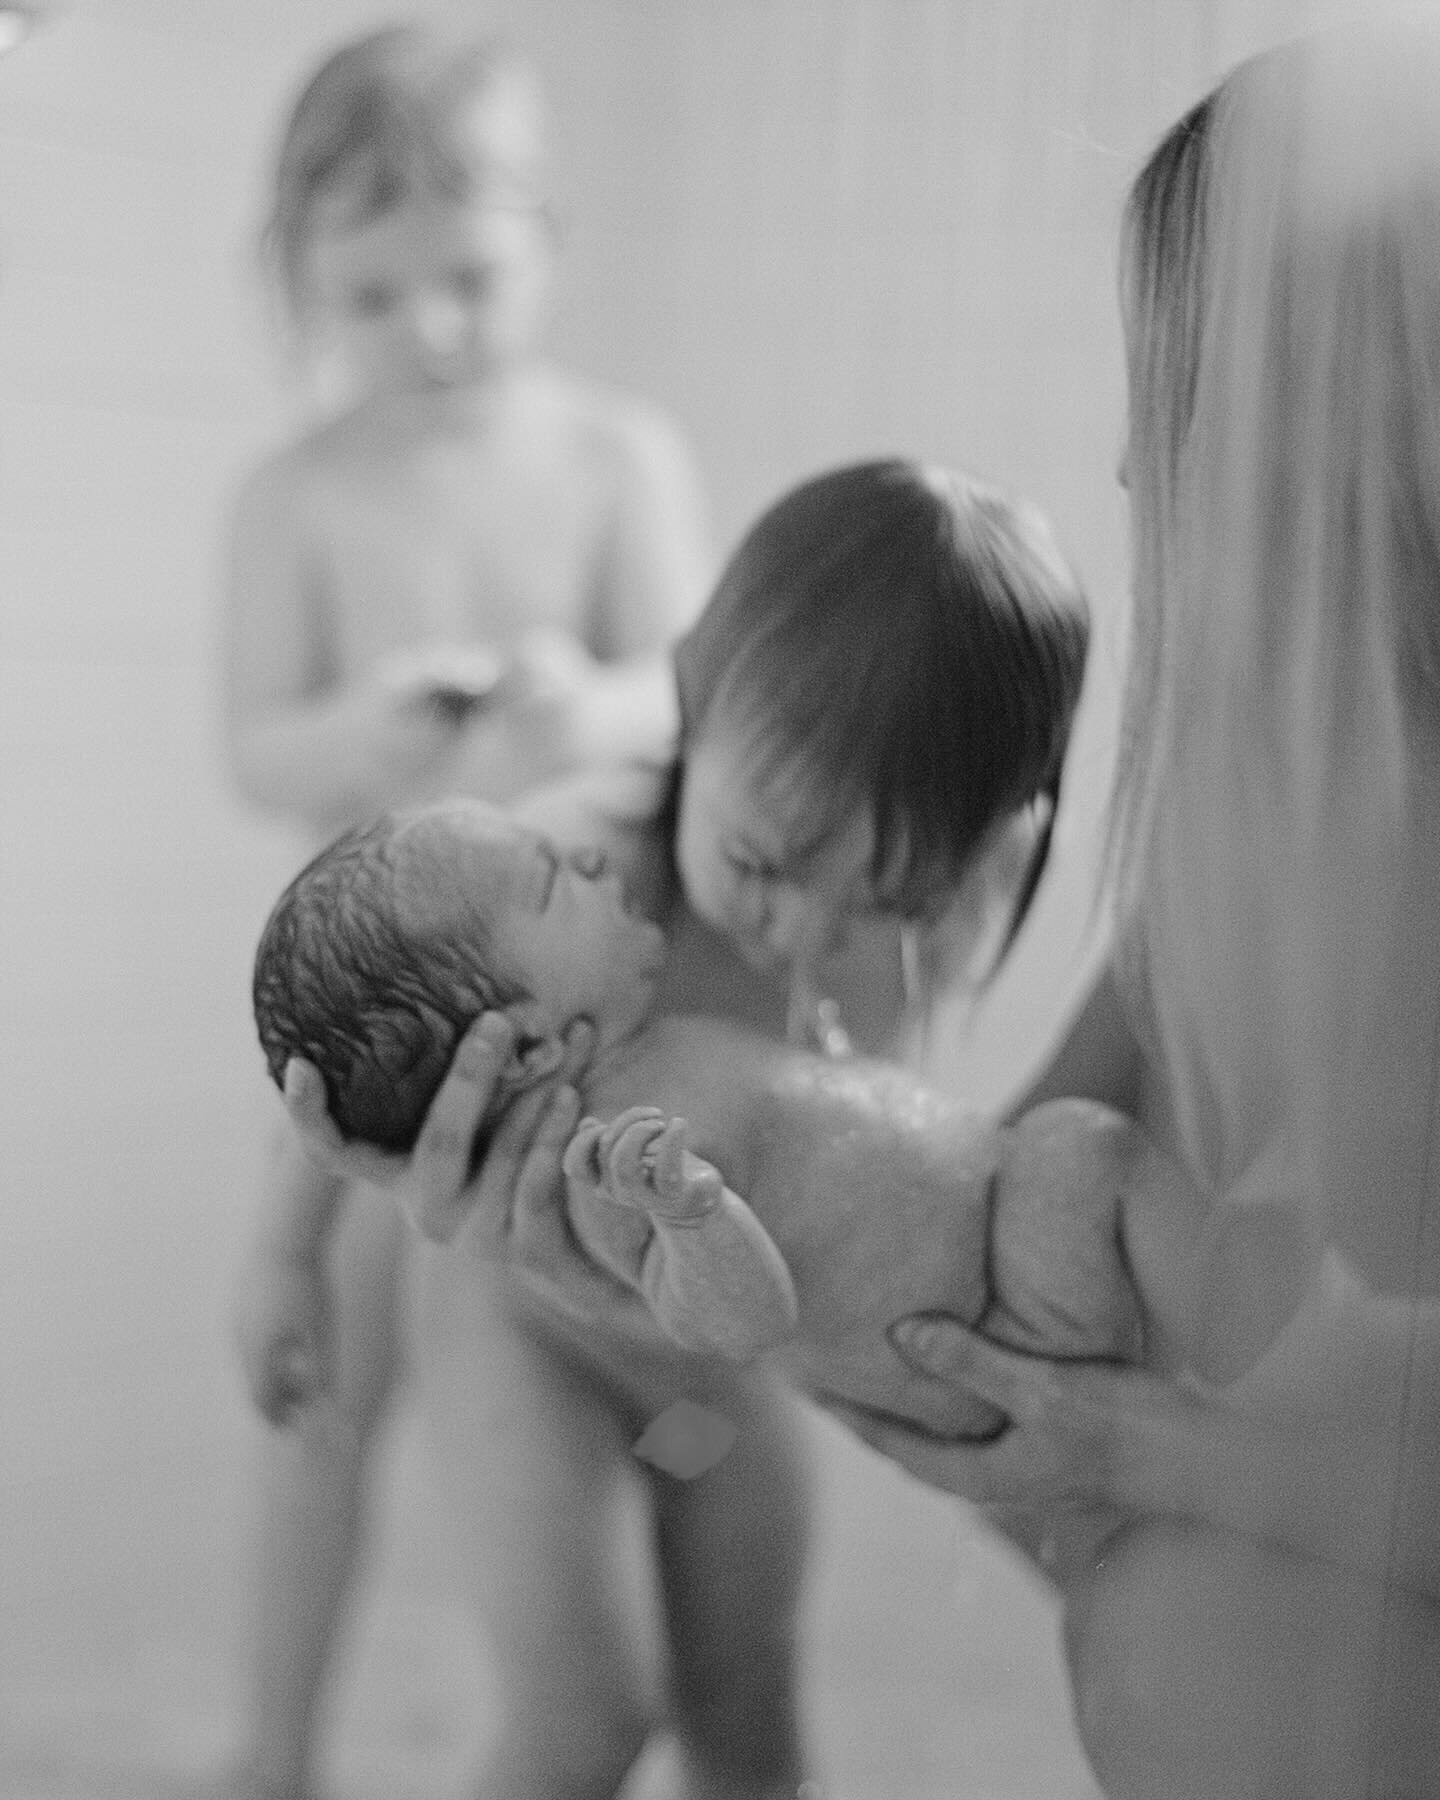 A postpartum shower with mother and her children.

My heart will never be the same since I began working intimately with mothers. It&rsquo;s an honour that I hold dearly. With each experience I feel a force, an interconnectedness that I&rsquo;m incre